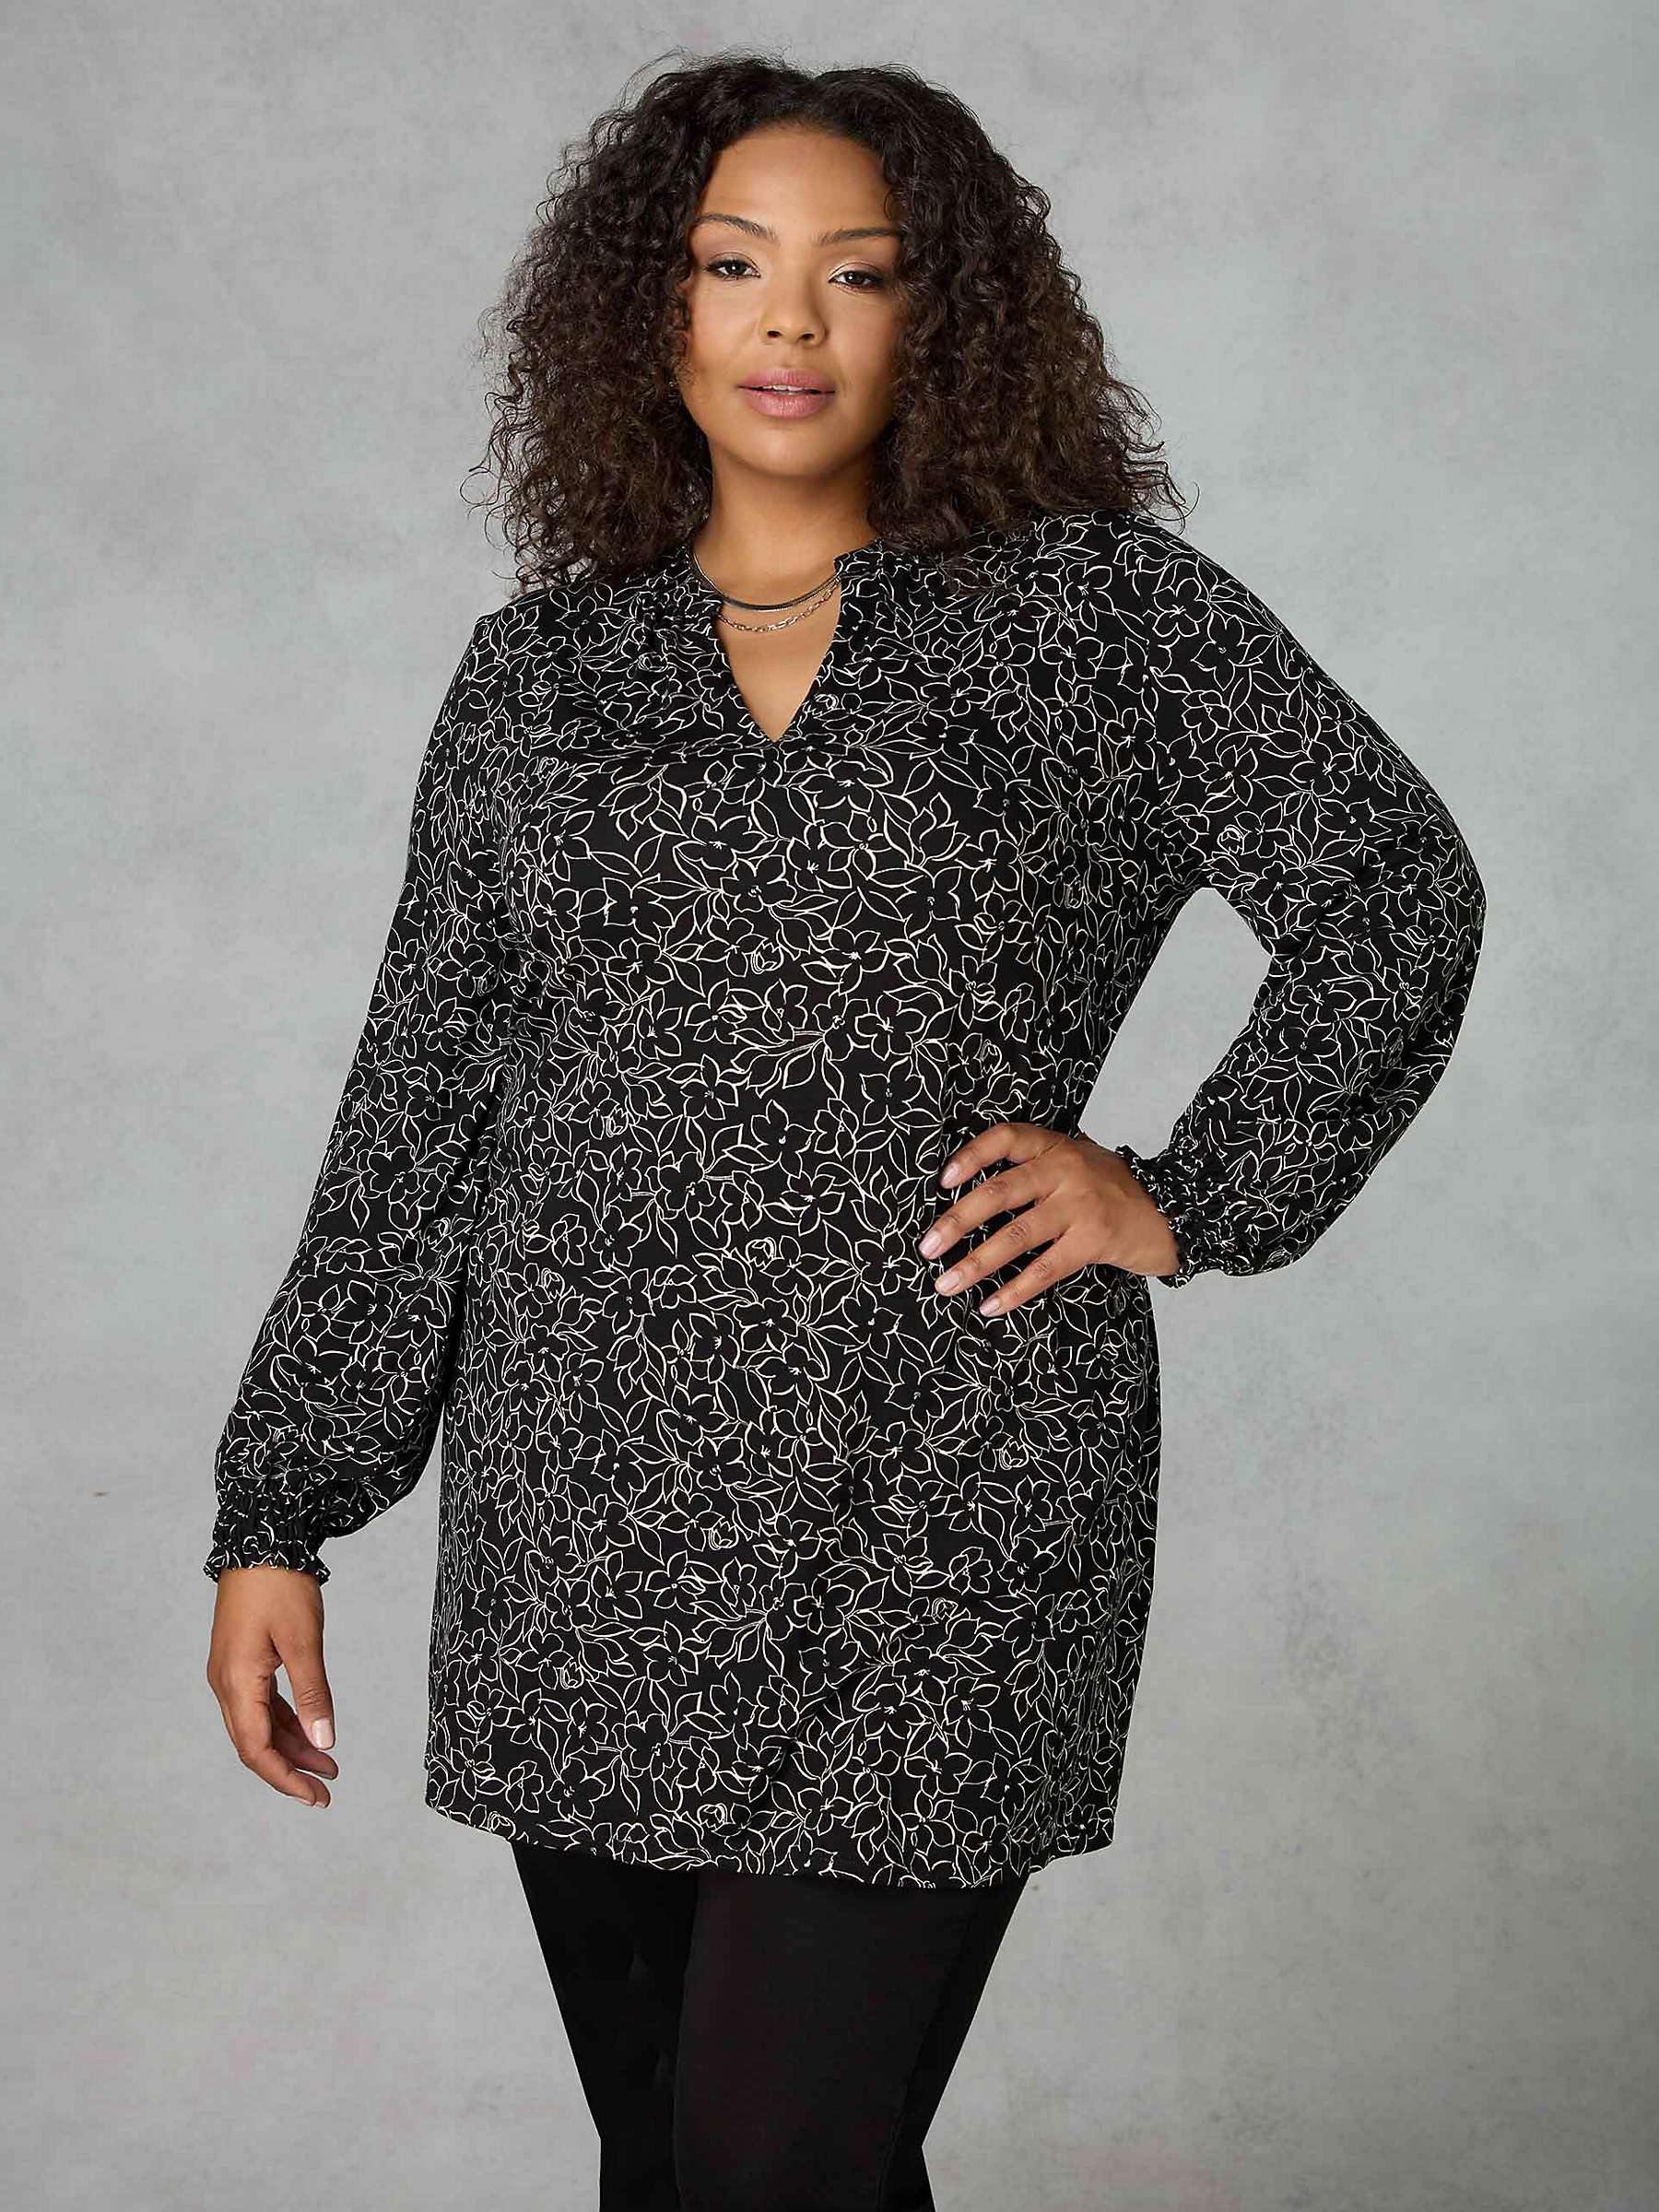 Buy Live Unlimited Curve Linear Floral Print Jersey Shirred Cuff Tunic Top, Black Online at johnlewis.com